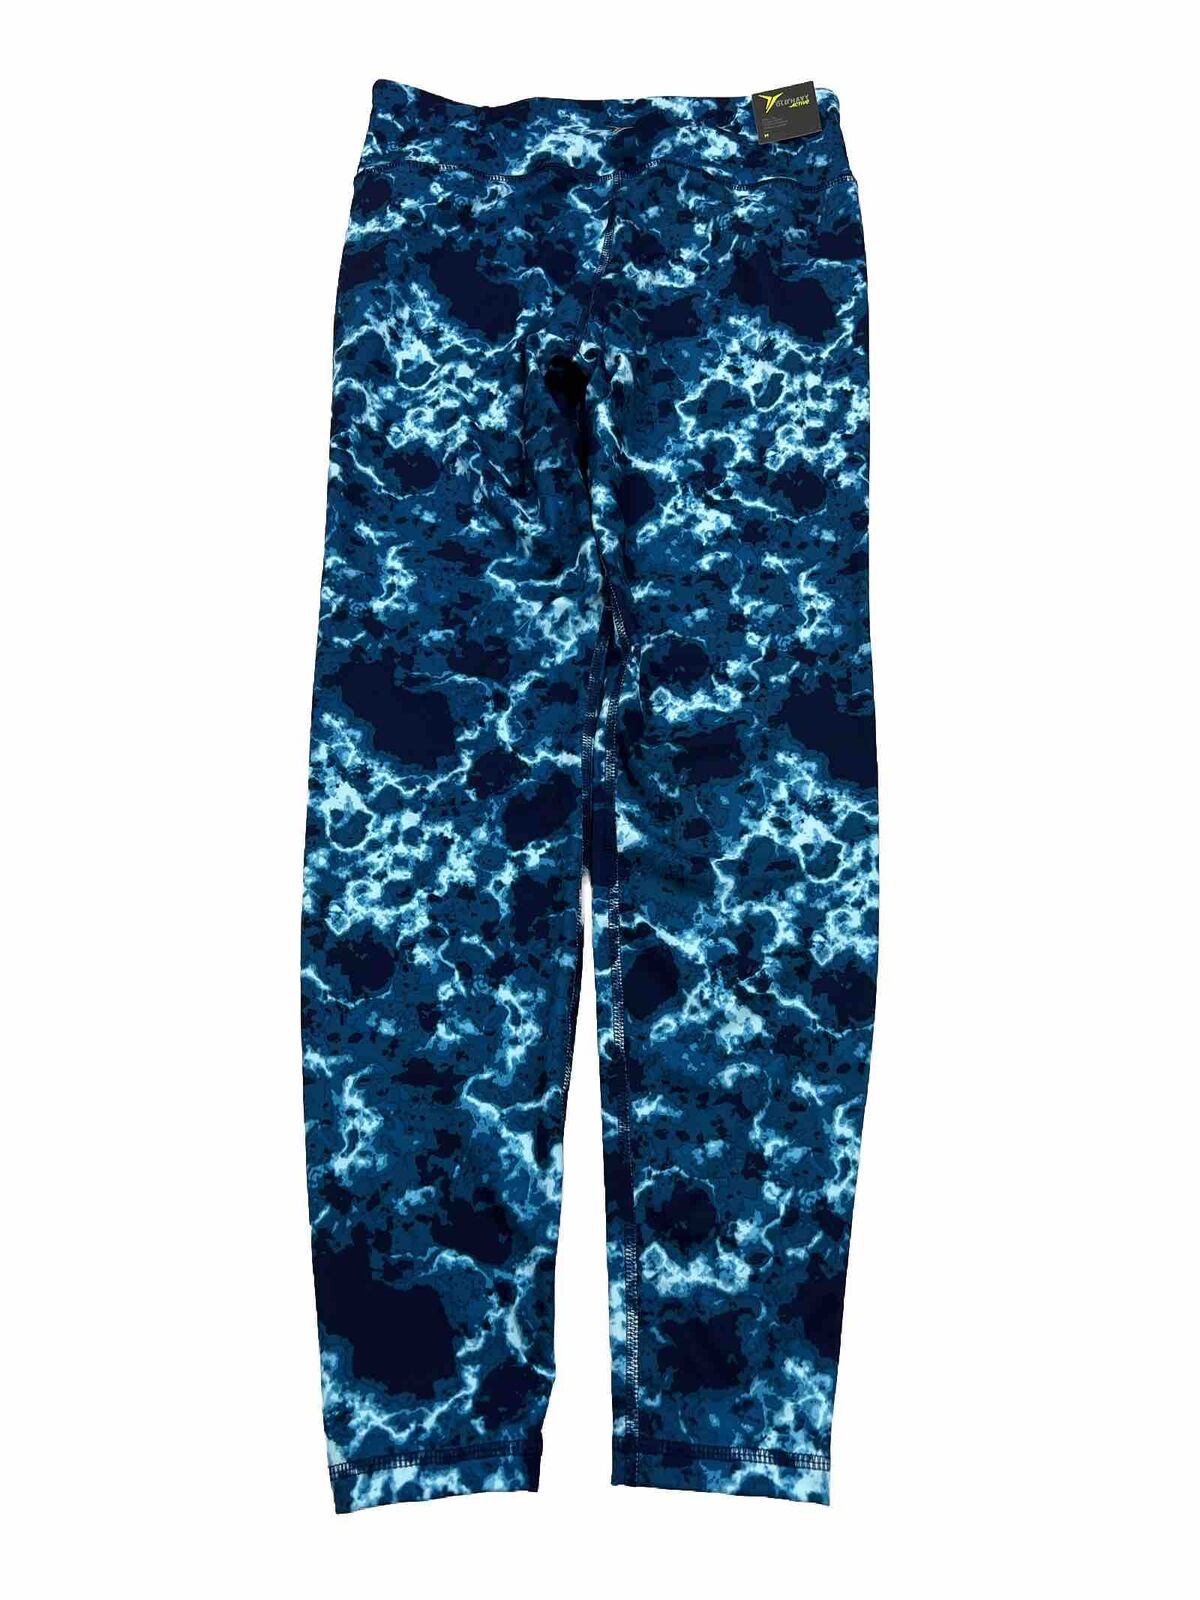 NEW Old Navy Women's Blue Active Mid Rise Athletic Leggings - M